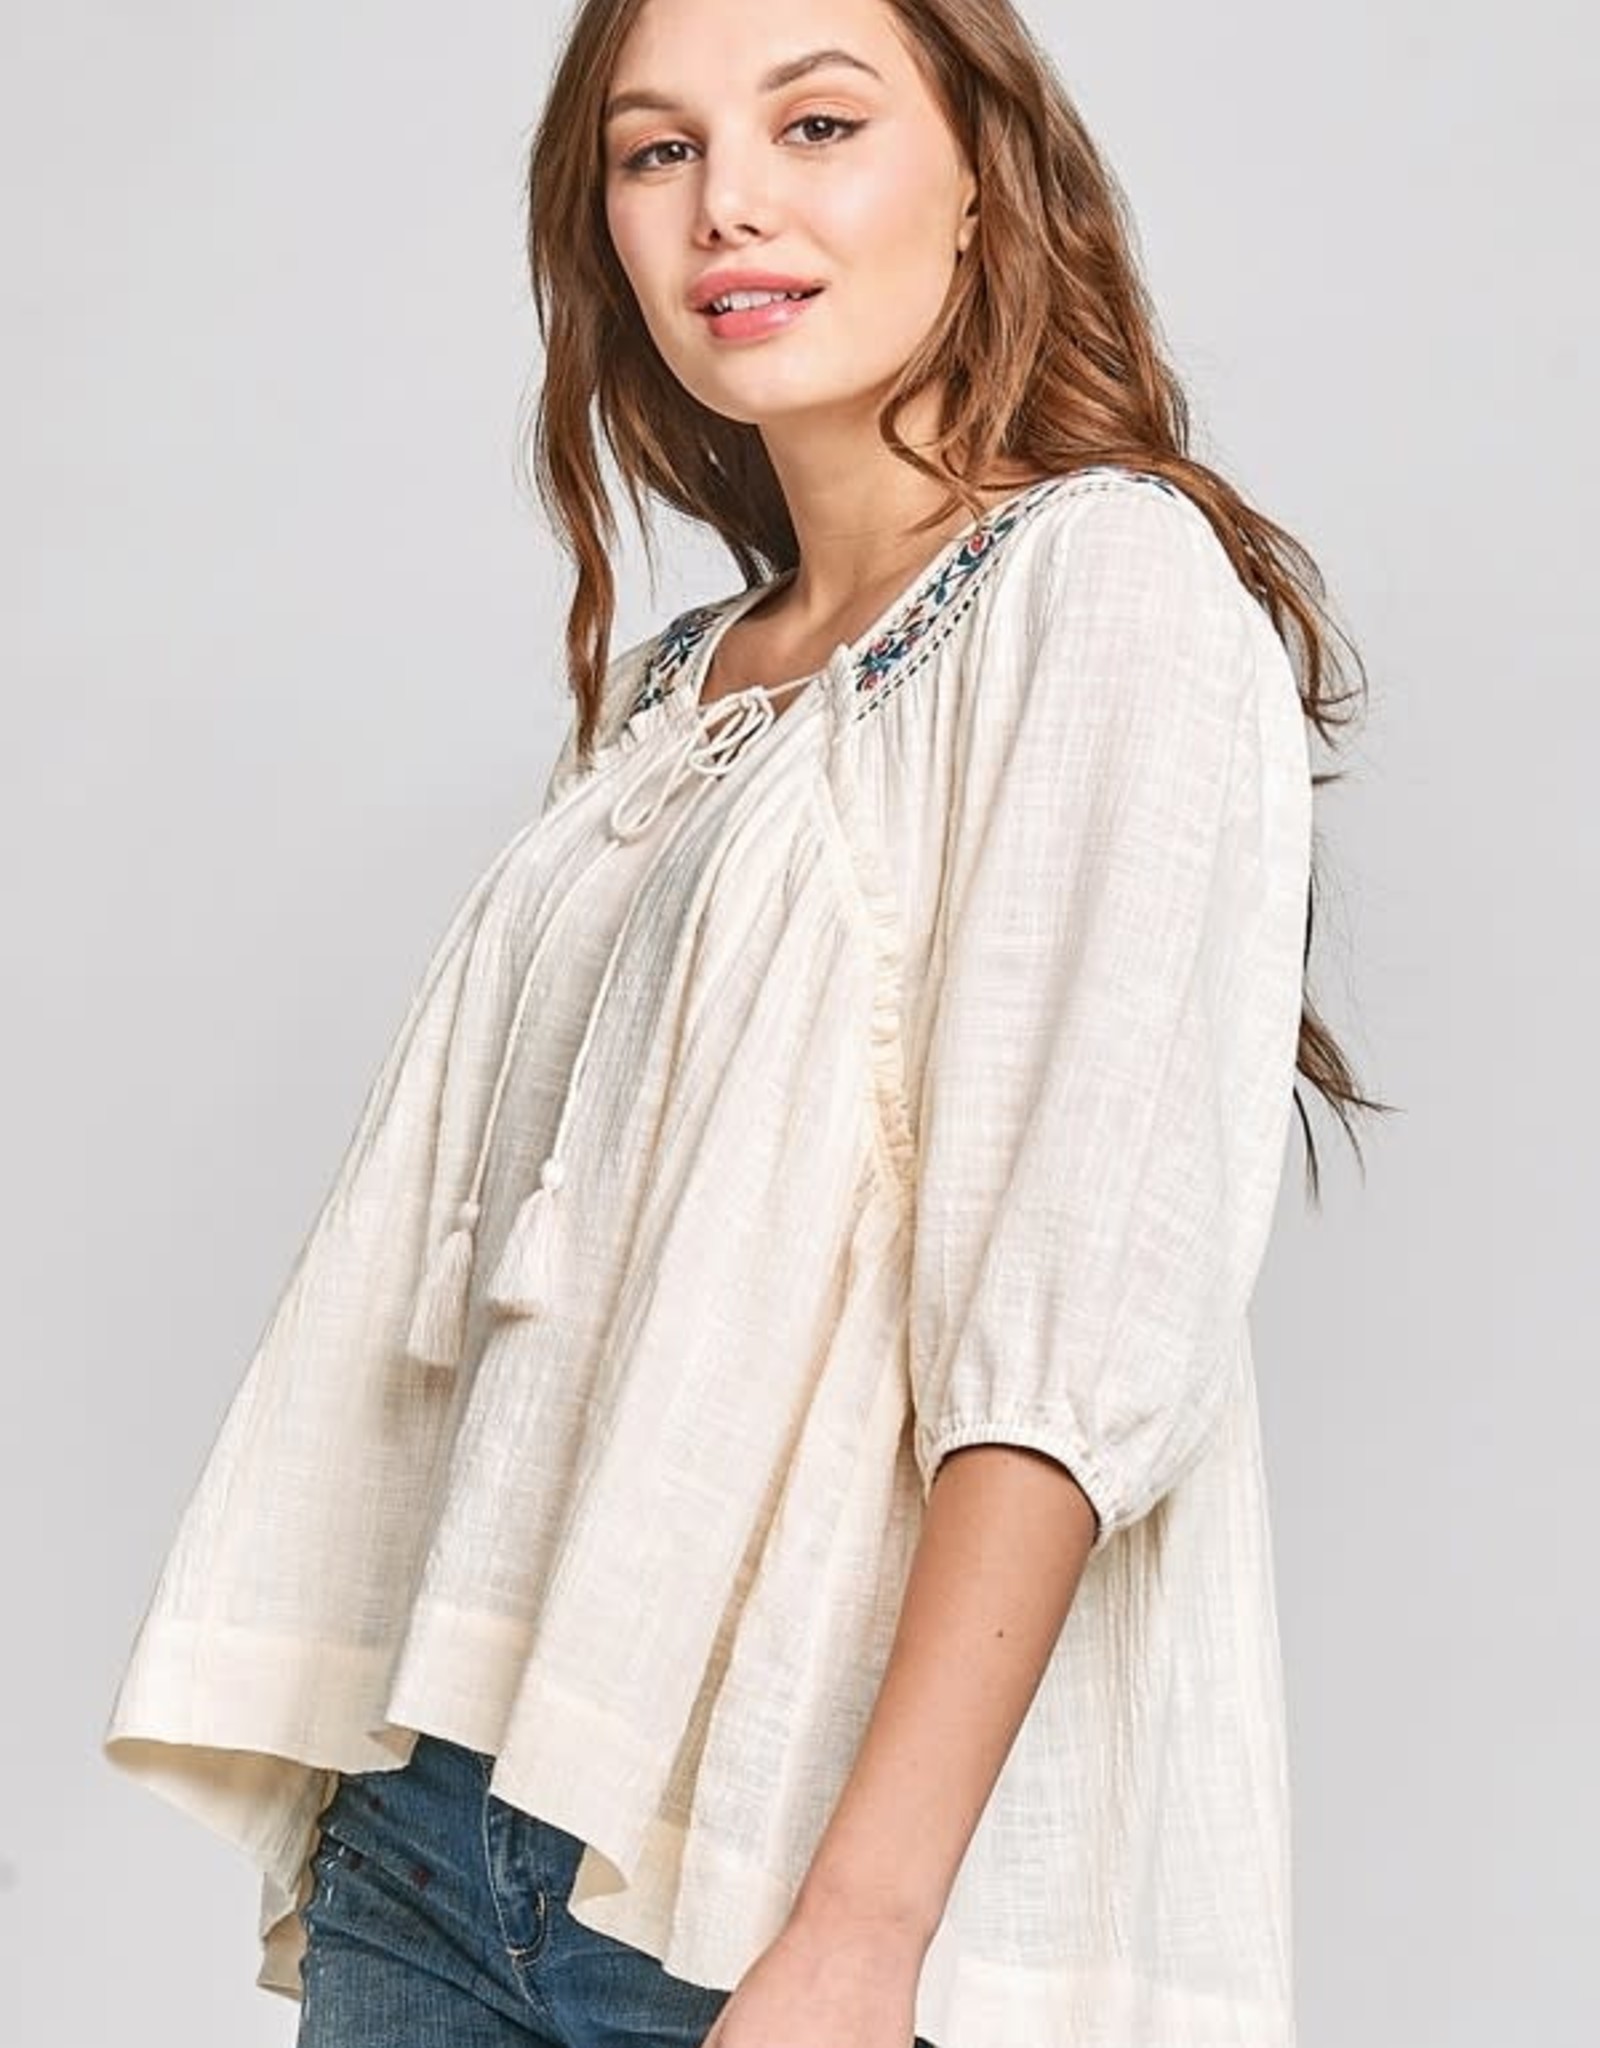 Oddi Woven Gauze Peasant Blouse with Floral Embroidery - IT20586